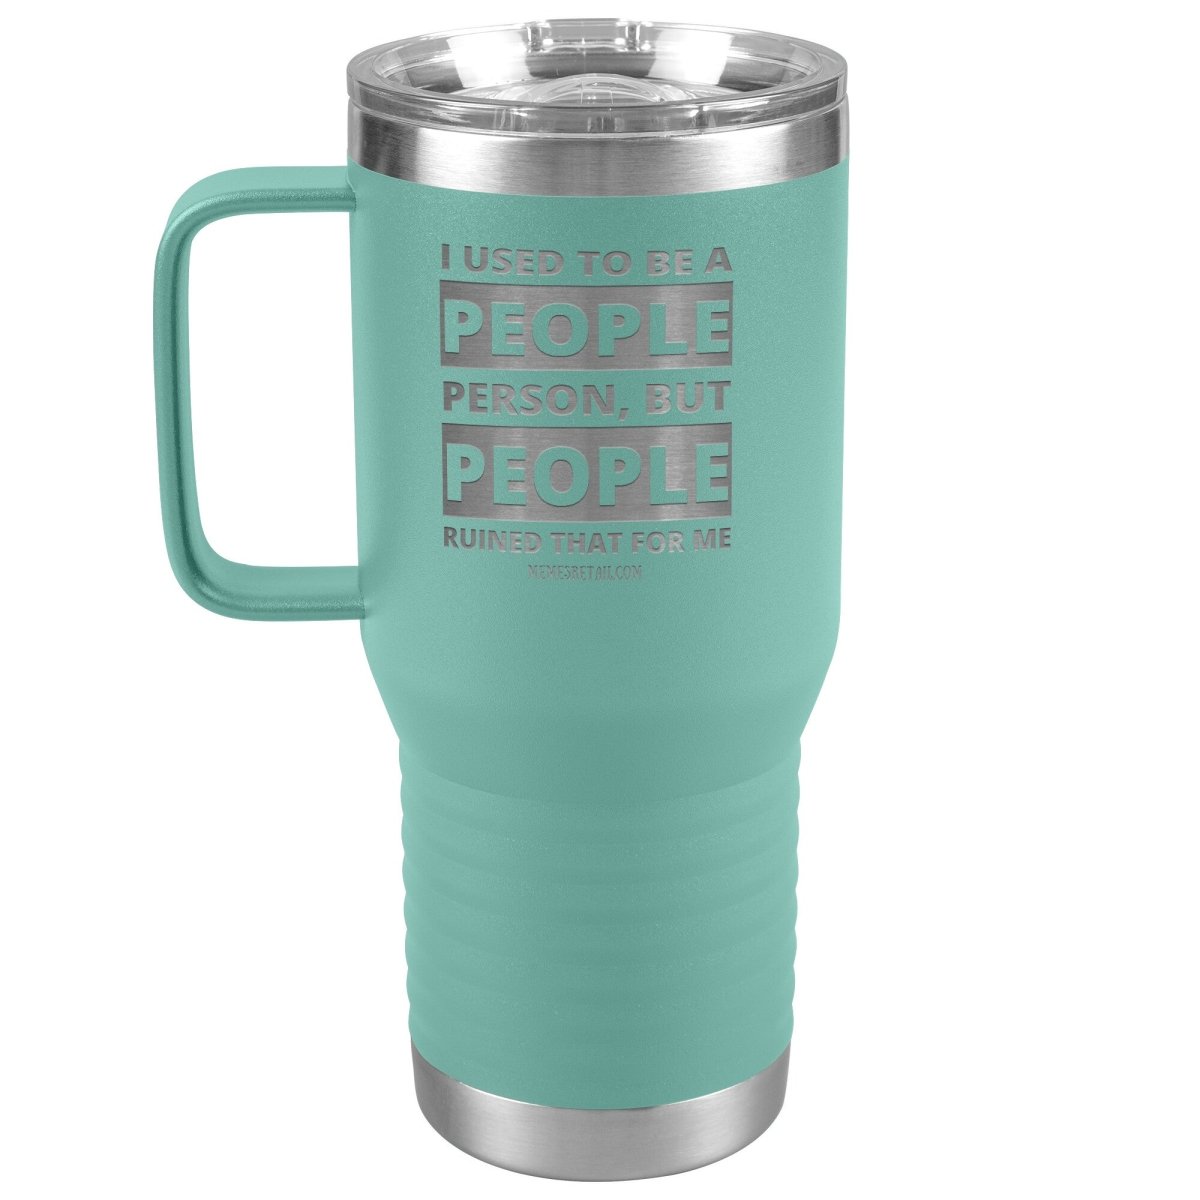 I Used To Be A People Person, But People Ruined That For Me Tumblers, 20oz Travel Tumbler / Teal - MemesRetail.com